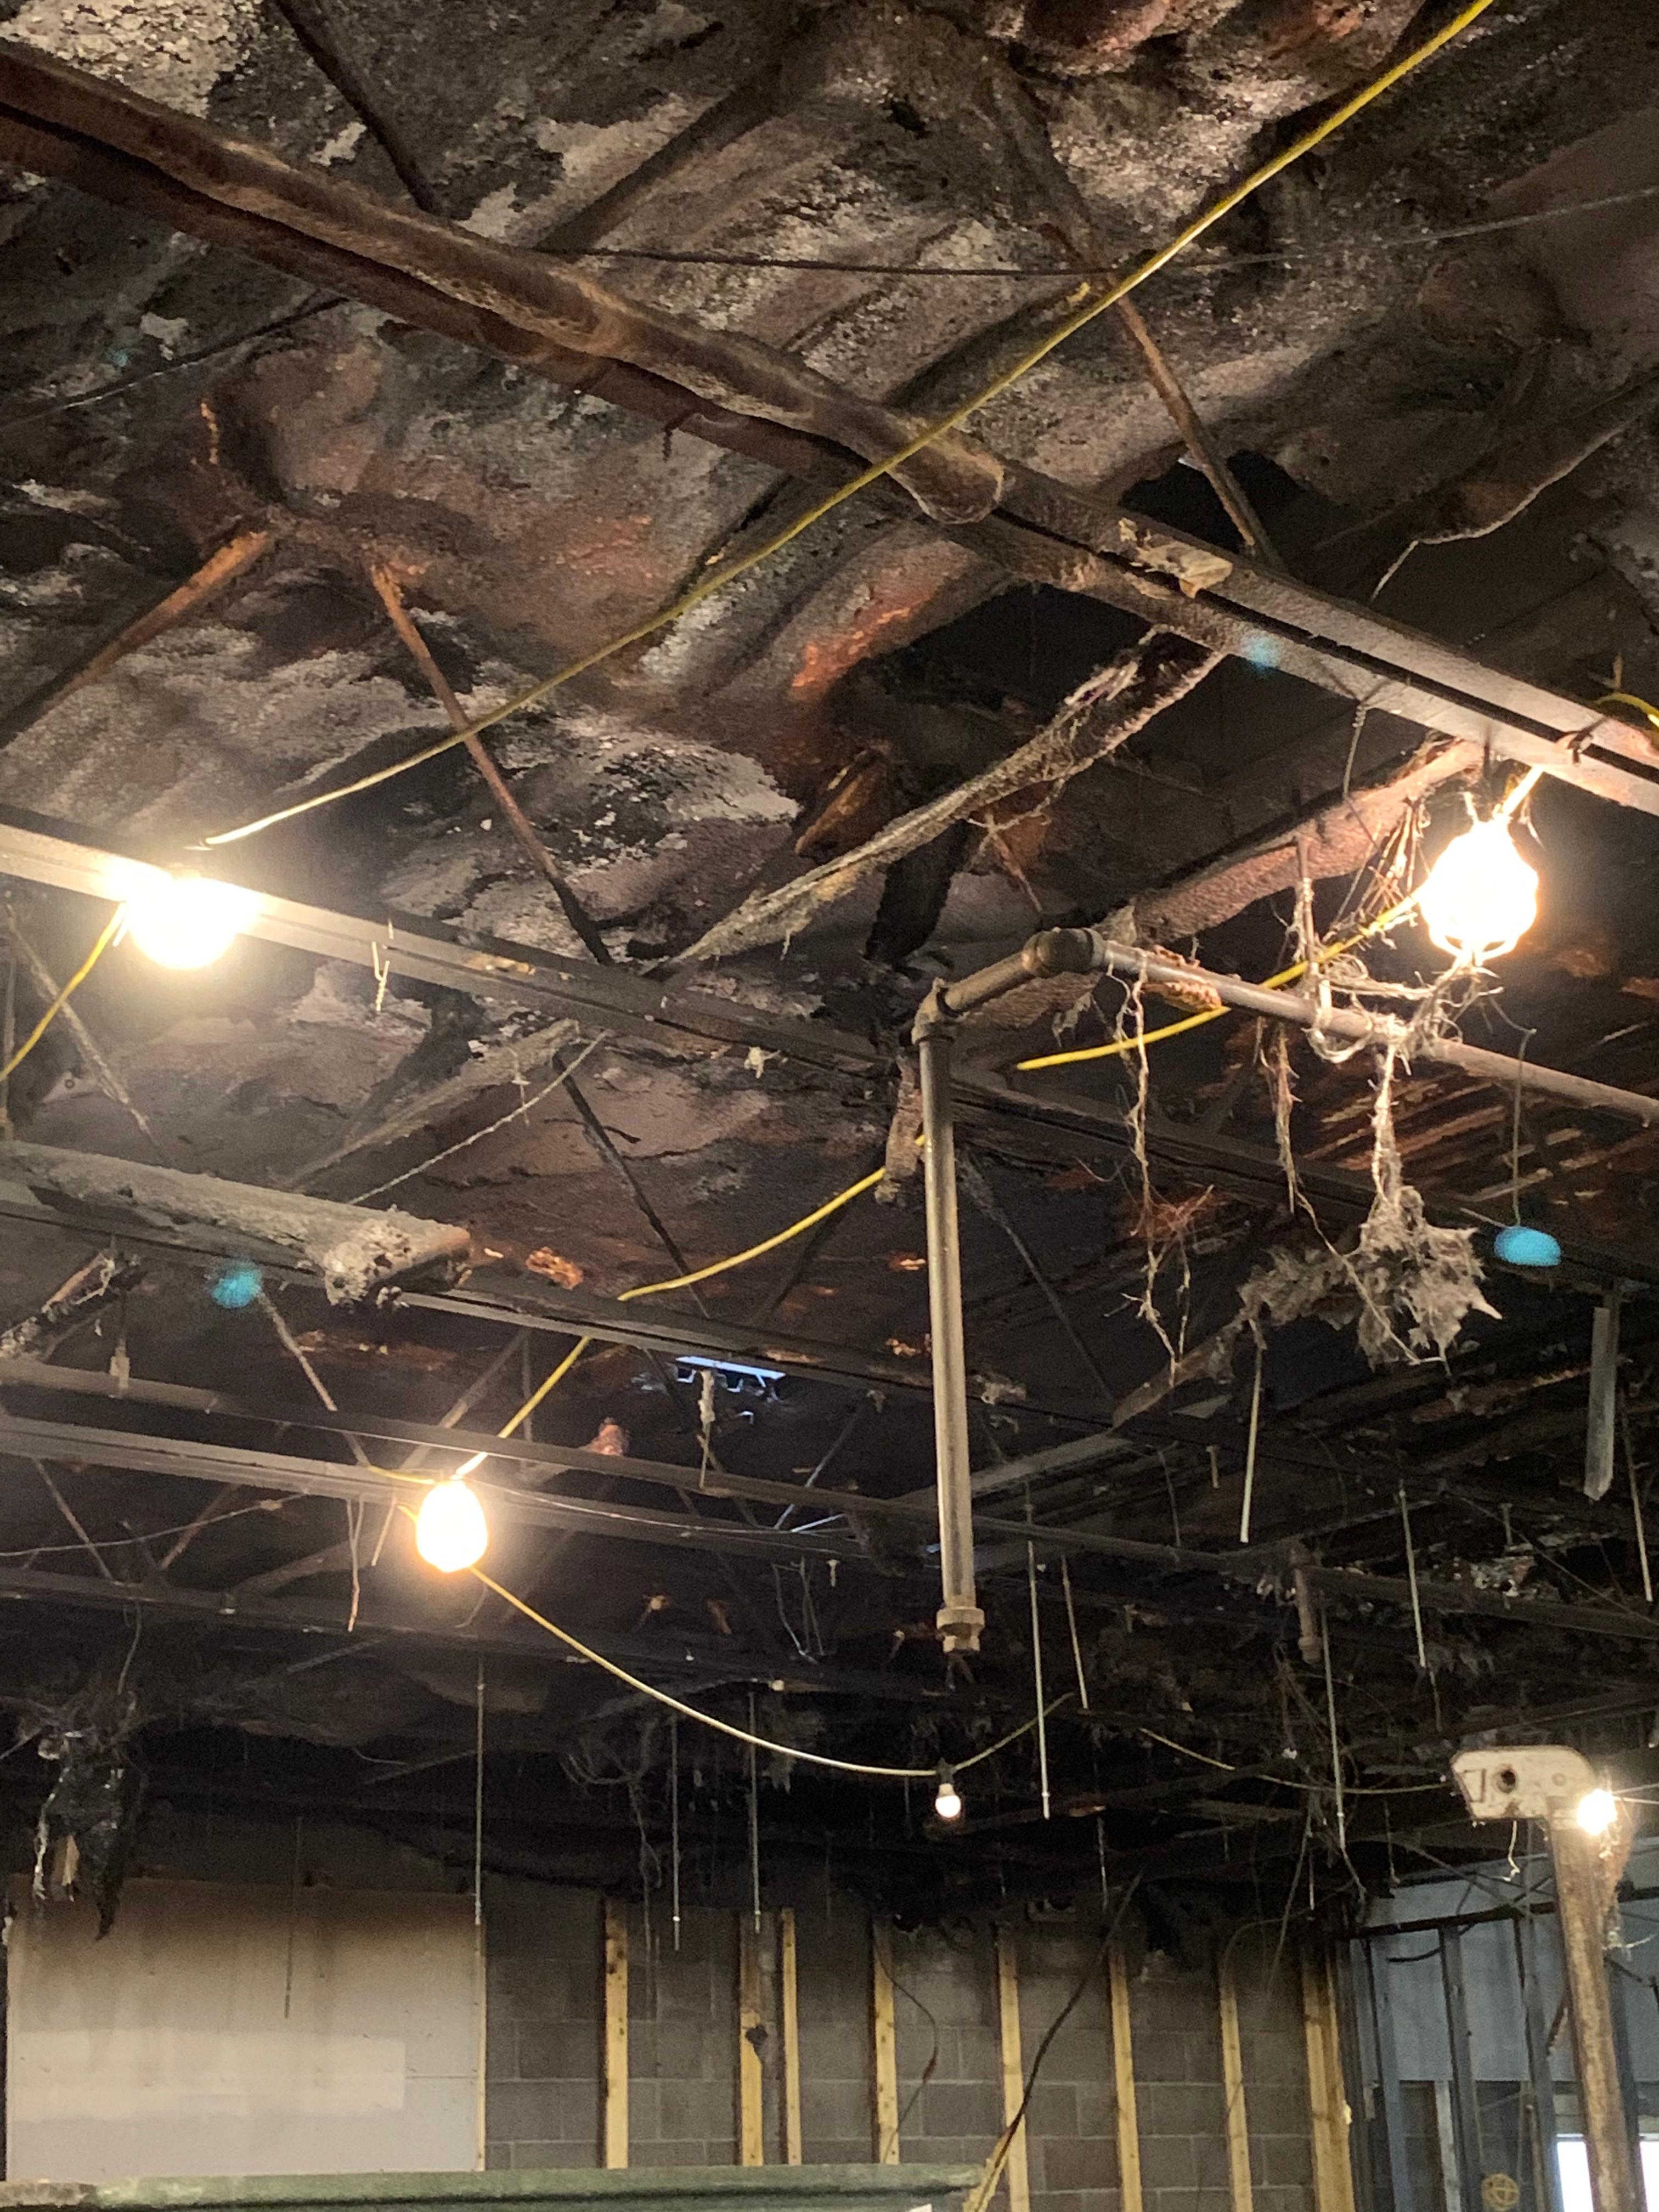 Fire and smoke damage restoration should be left to the professionals. You can count on SERVPRO of Harrisonville/Belton/Raymore to make it "Like it never even happened."